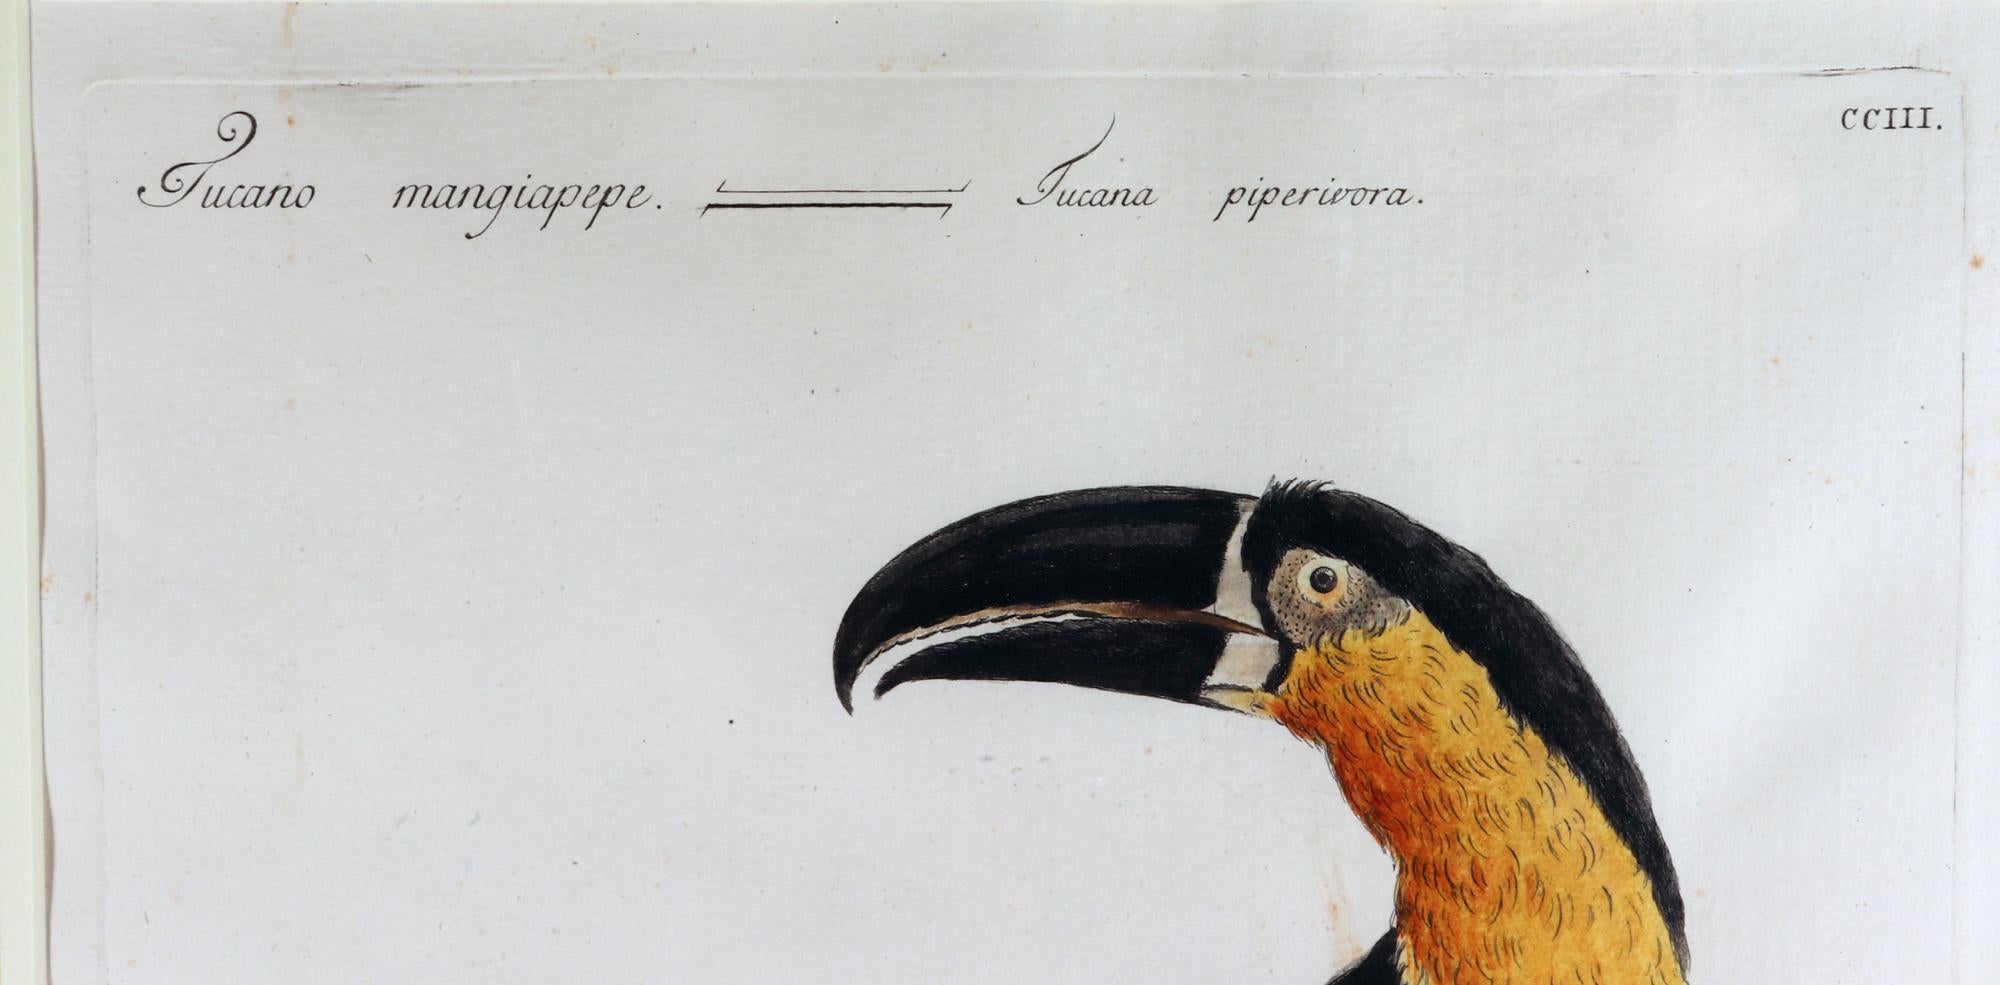 Antique Engraving of a Tucano Mangiapepe by Saverio Manetti In Good Condition For Sale In Downingtown, PA